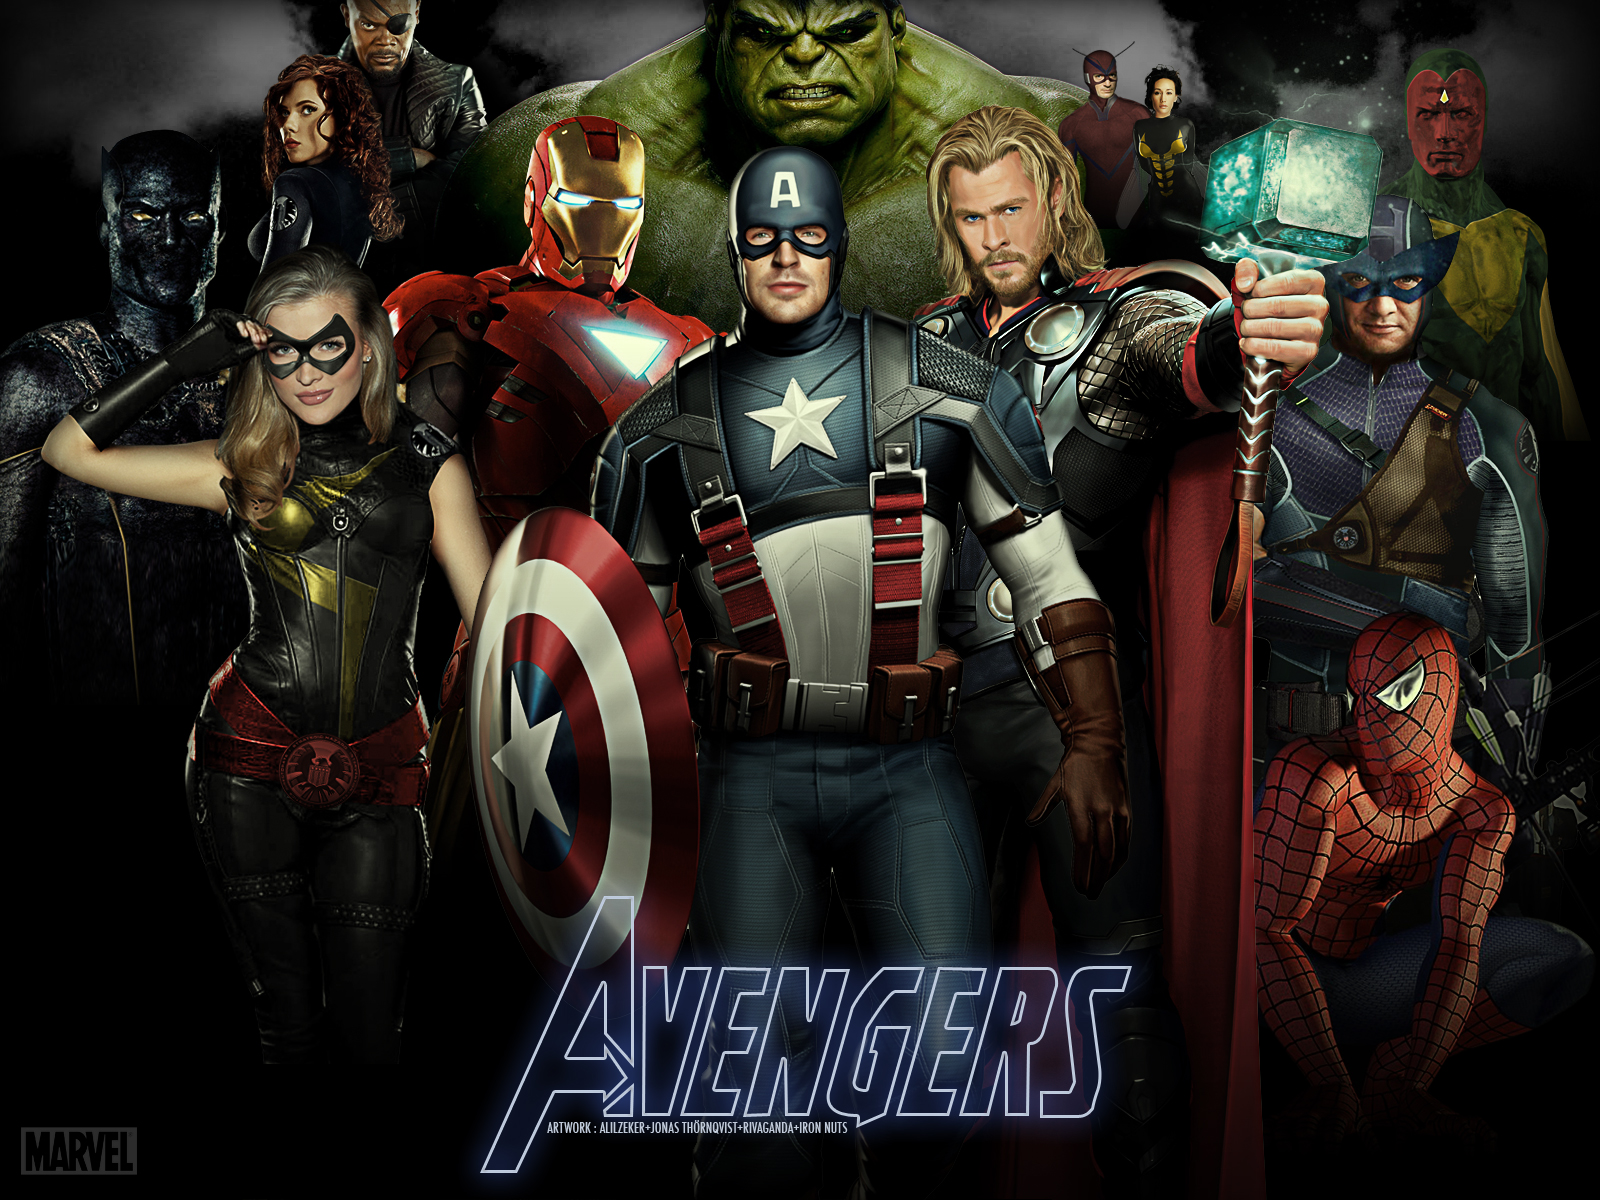 Words can not express the epicness of this Avengers wallpaper.